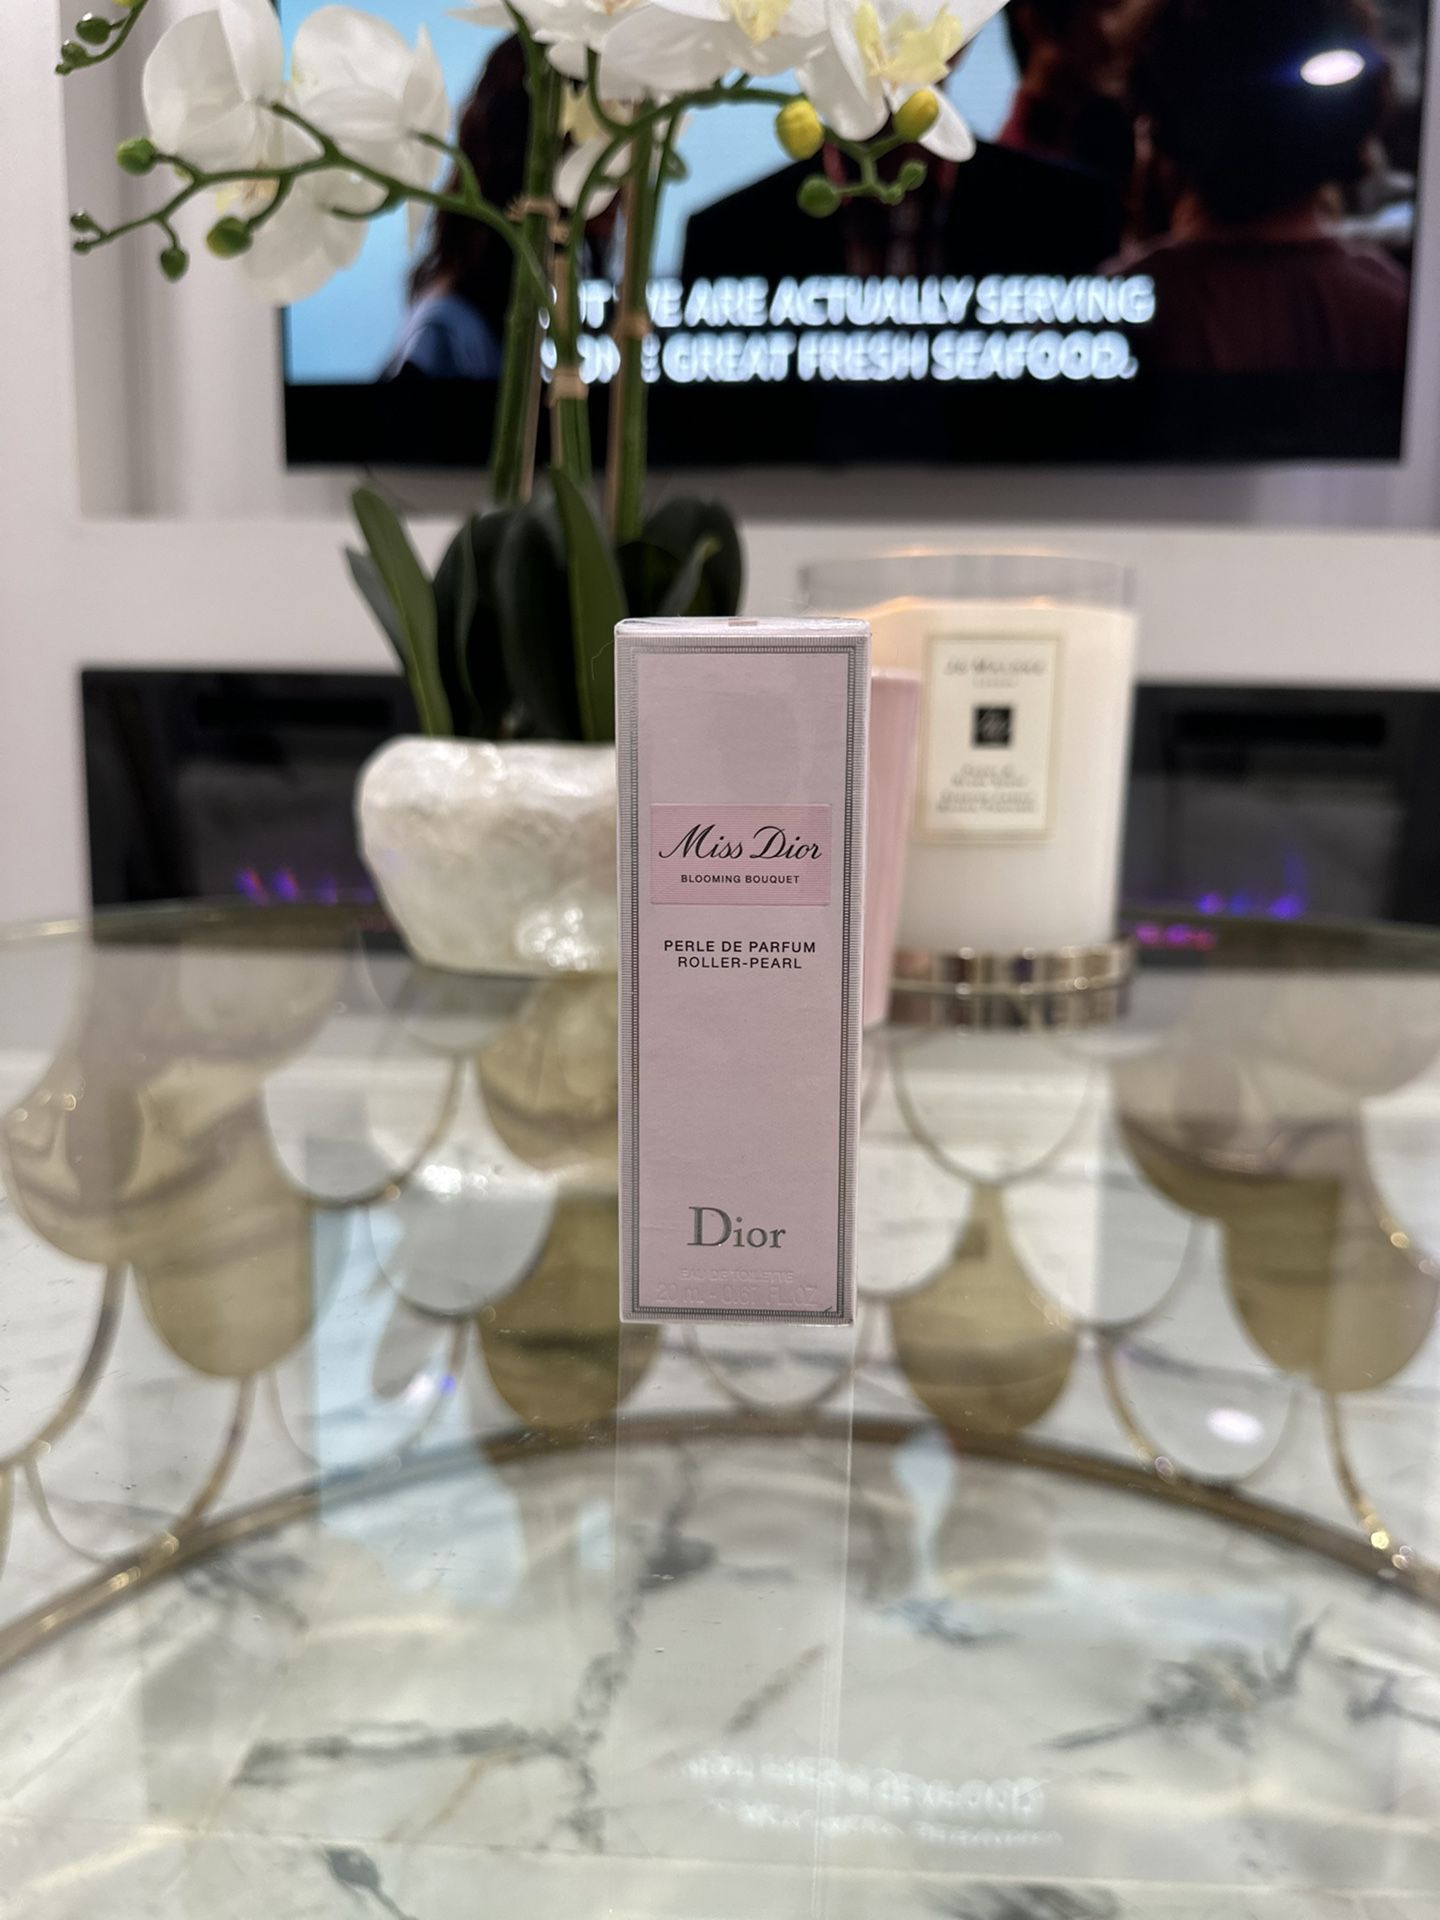 Miss Dior blooming bouquet roller pearl 💕